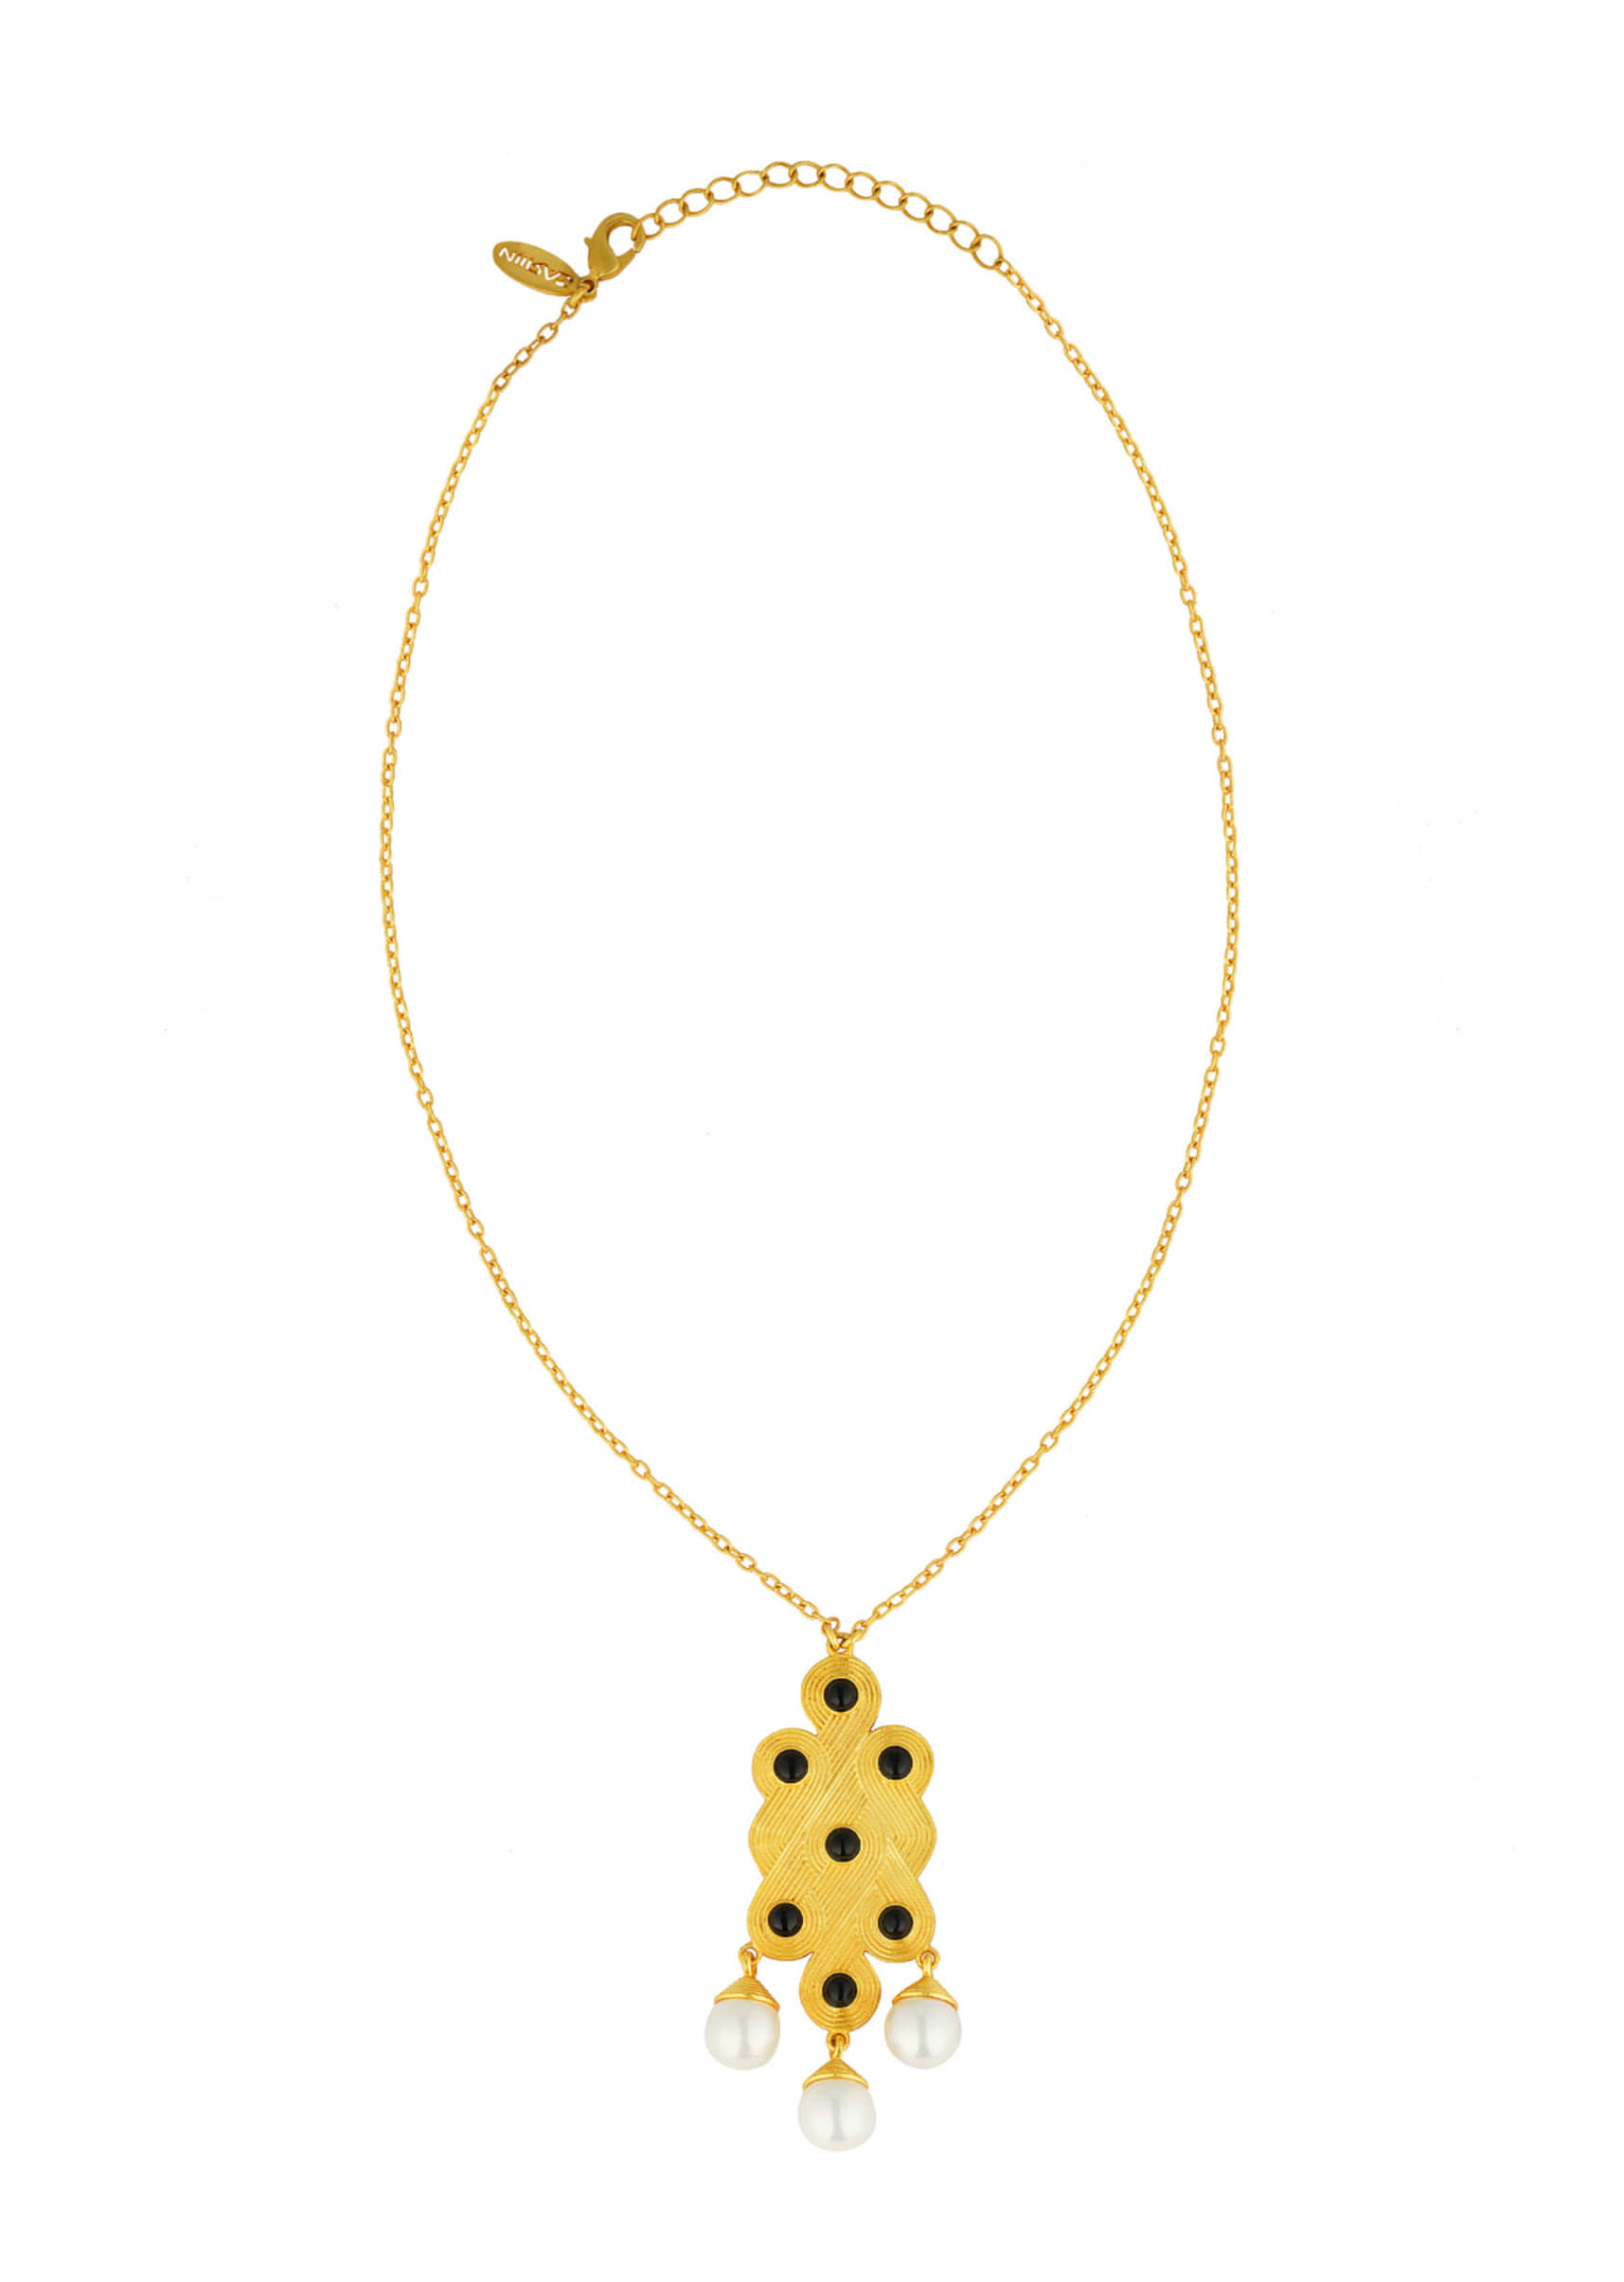 Gold Plated Necklace With A Pendant Studded With Onyx Stones And Dangling Pearls